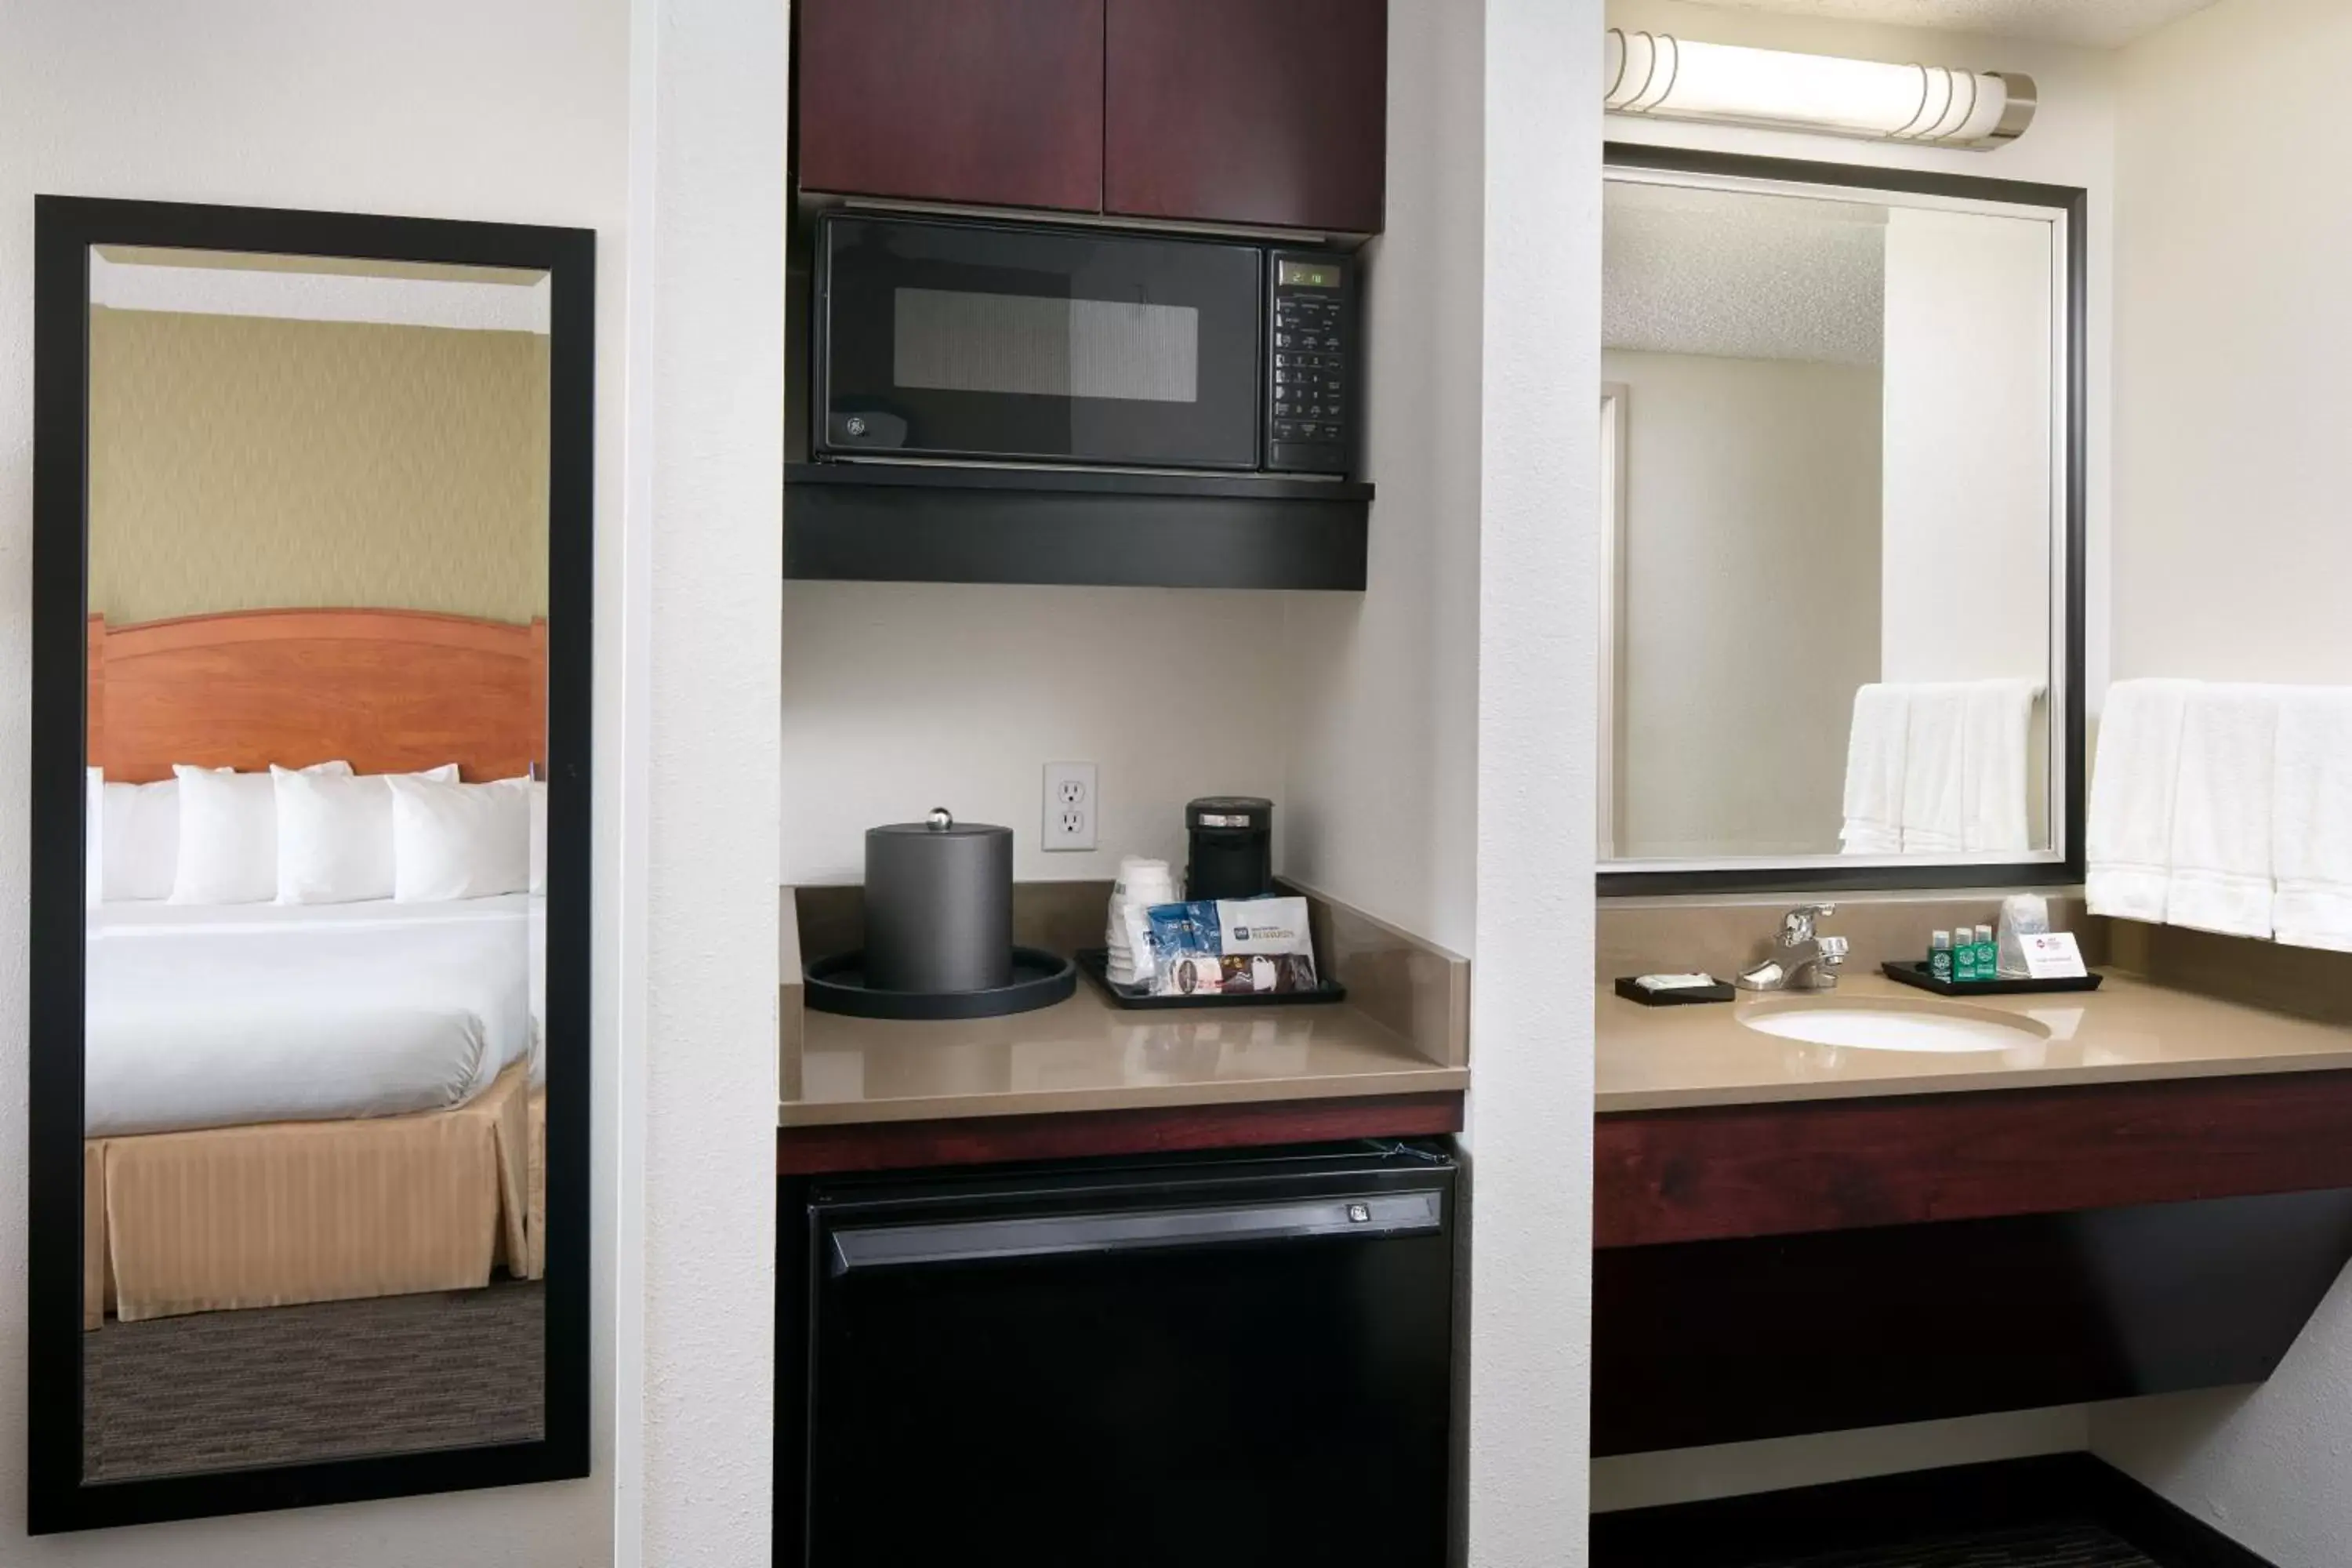 Area and facilities in High Plains Hotel at Denver International Airport